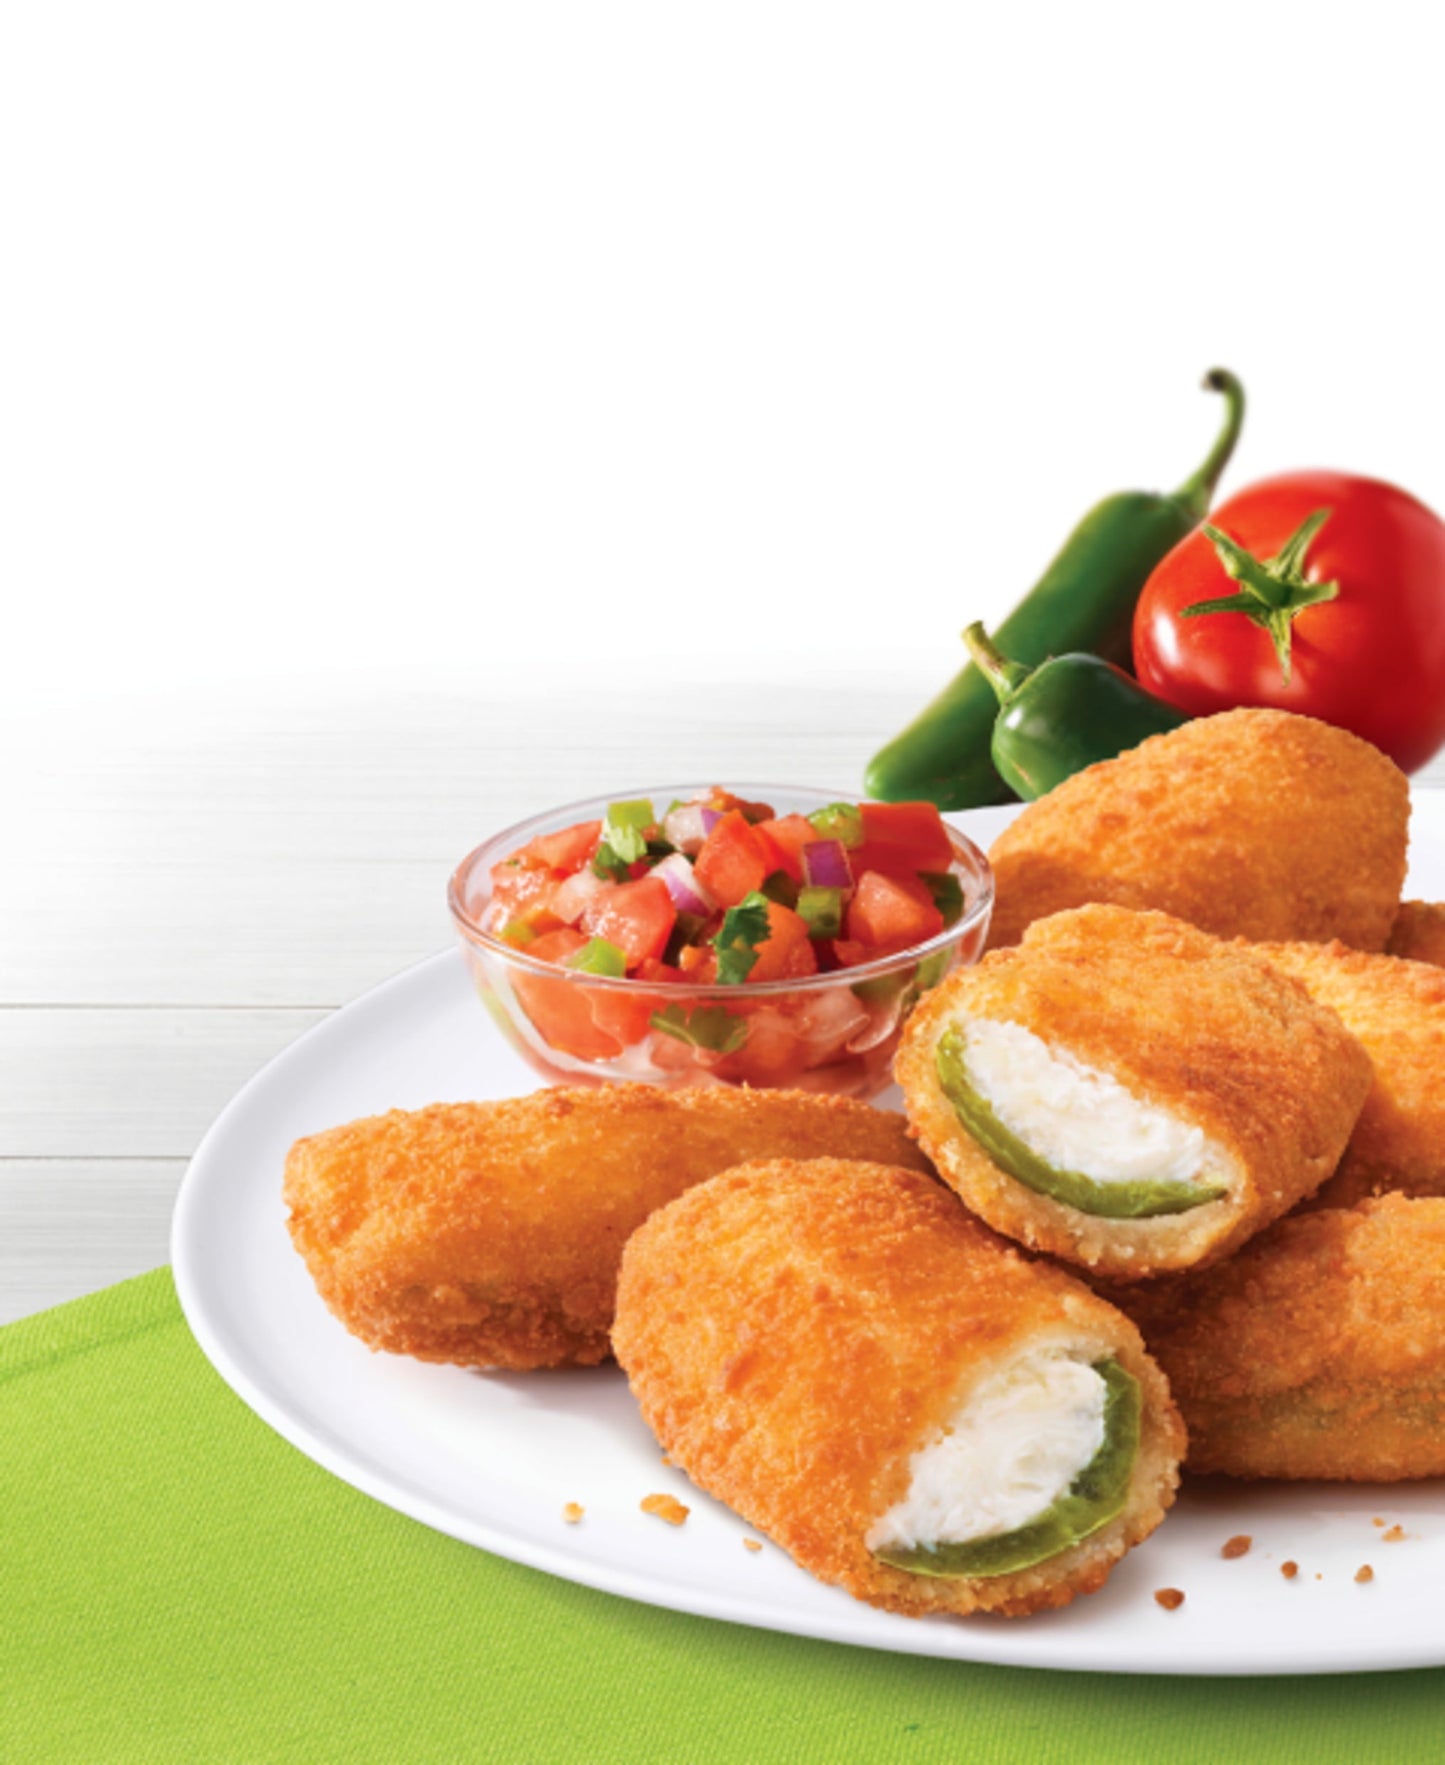 FARM RICH BREADED JALAPENO PEPPERS FILLED WITH CREAM CHEESE